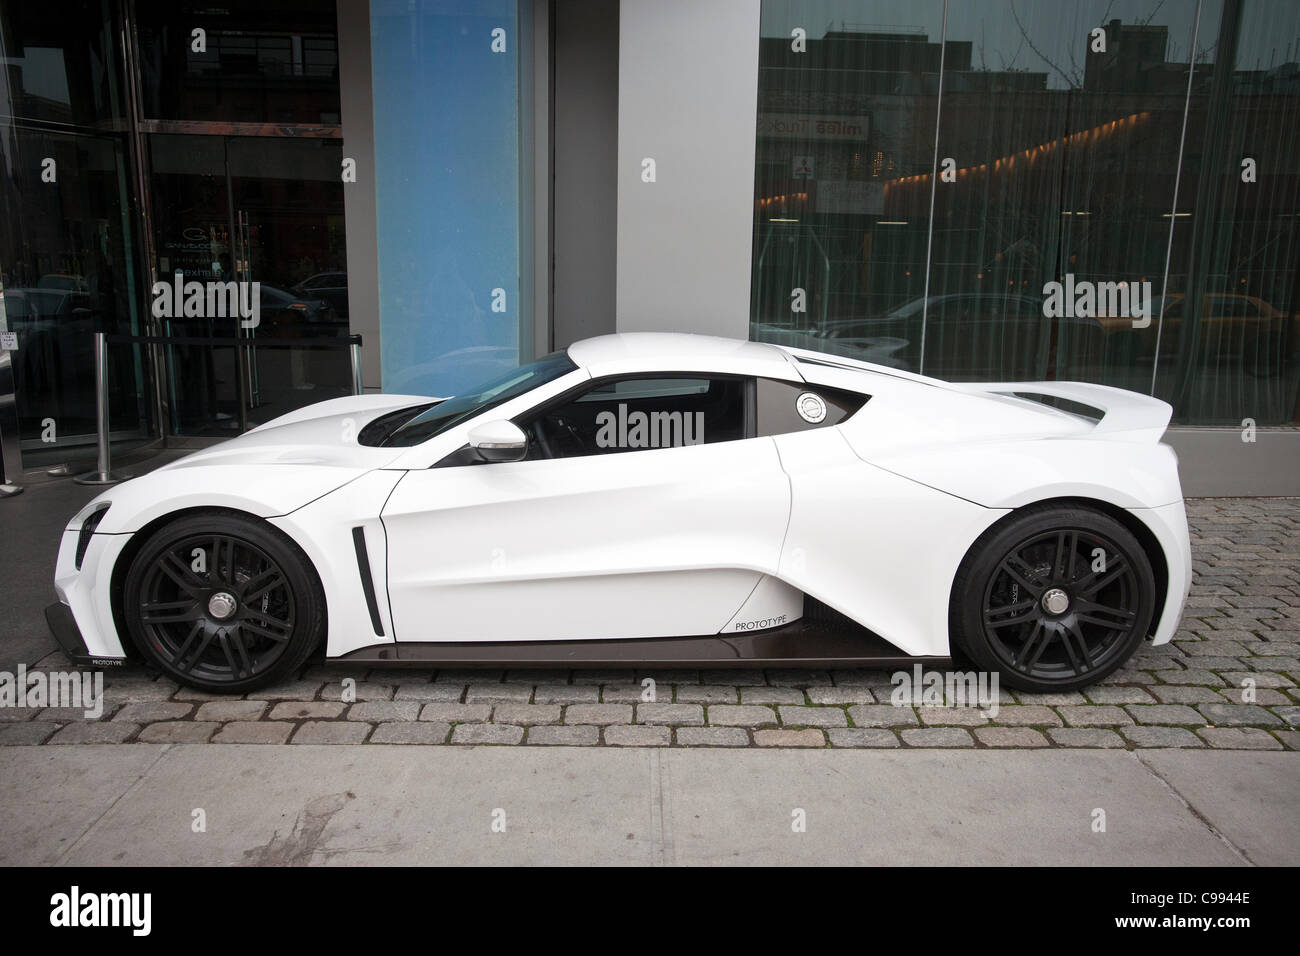 The Zenvo ST1-50S automobile is introduced in the trendy Meatpacking District in New York on Thursday, November 17, 2011. Stock Photo